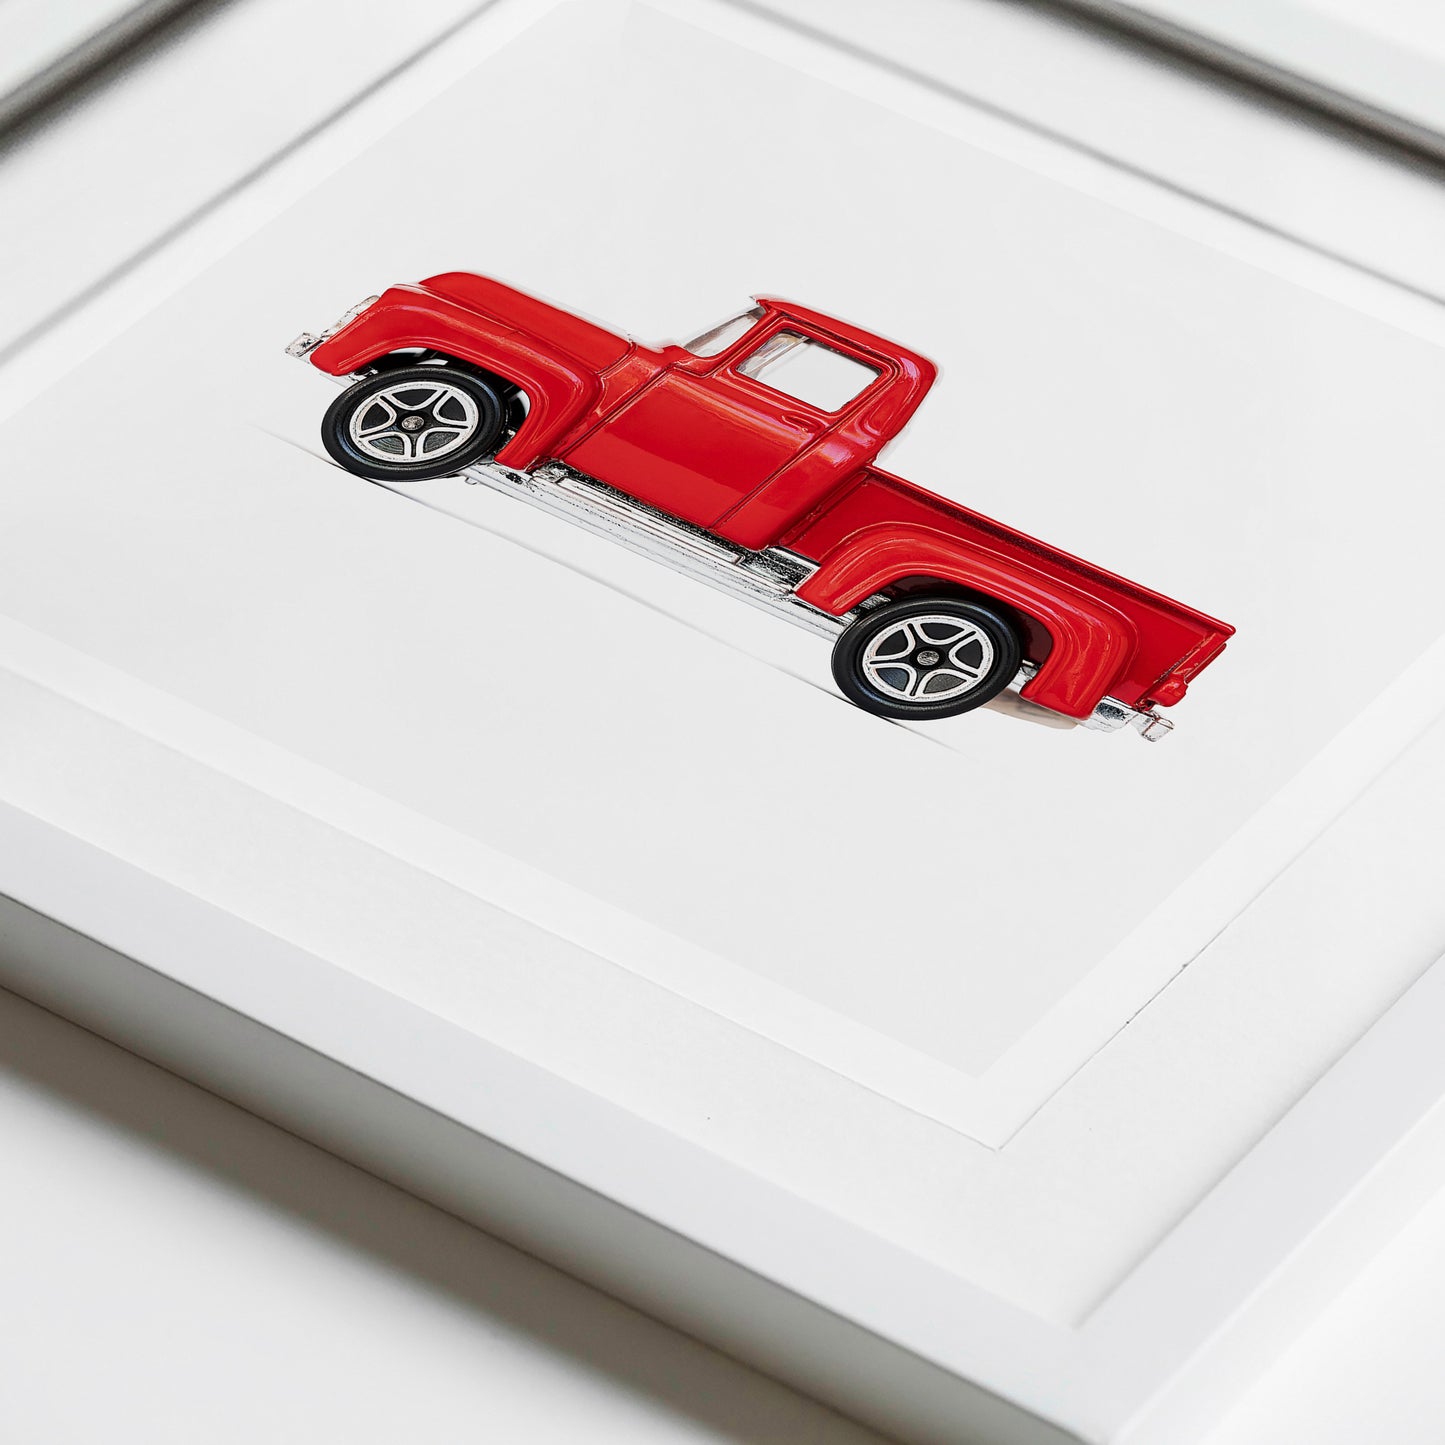 Old Red Pickup Truck nursery wall art for boys' room